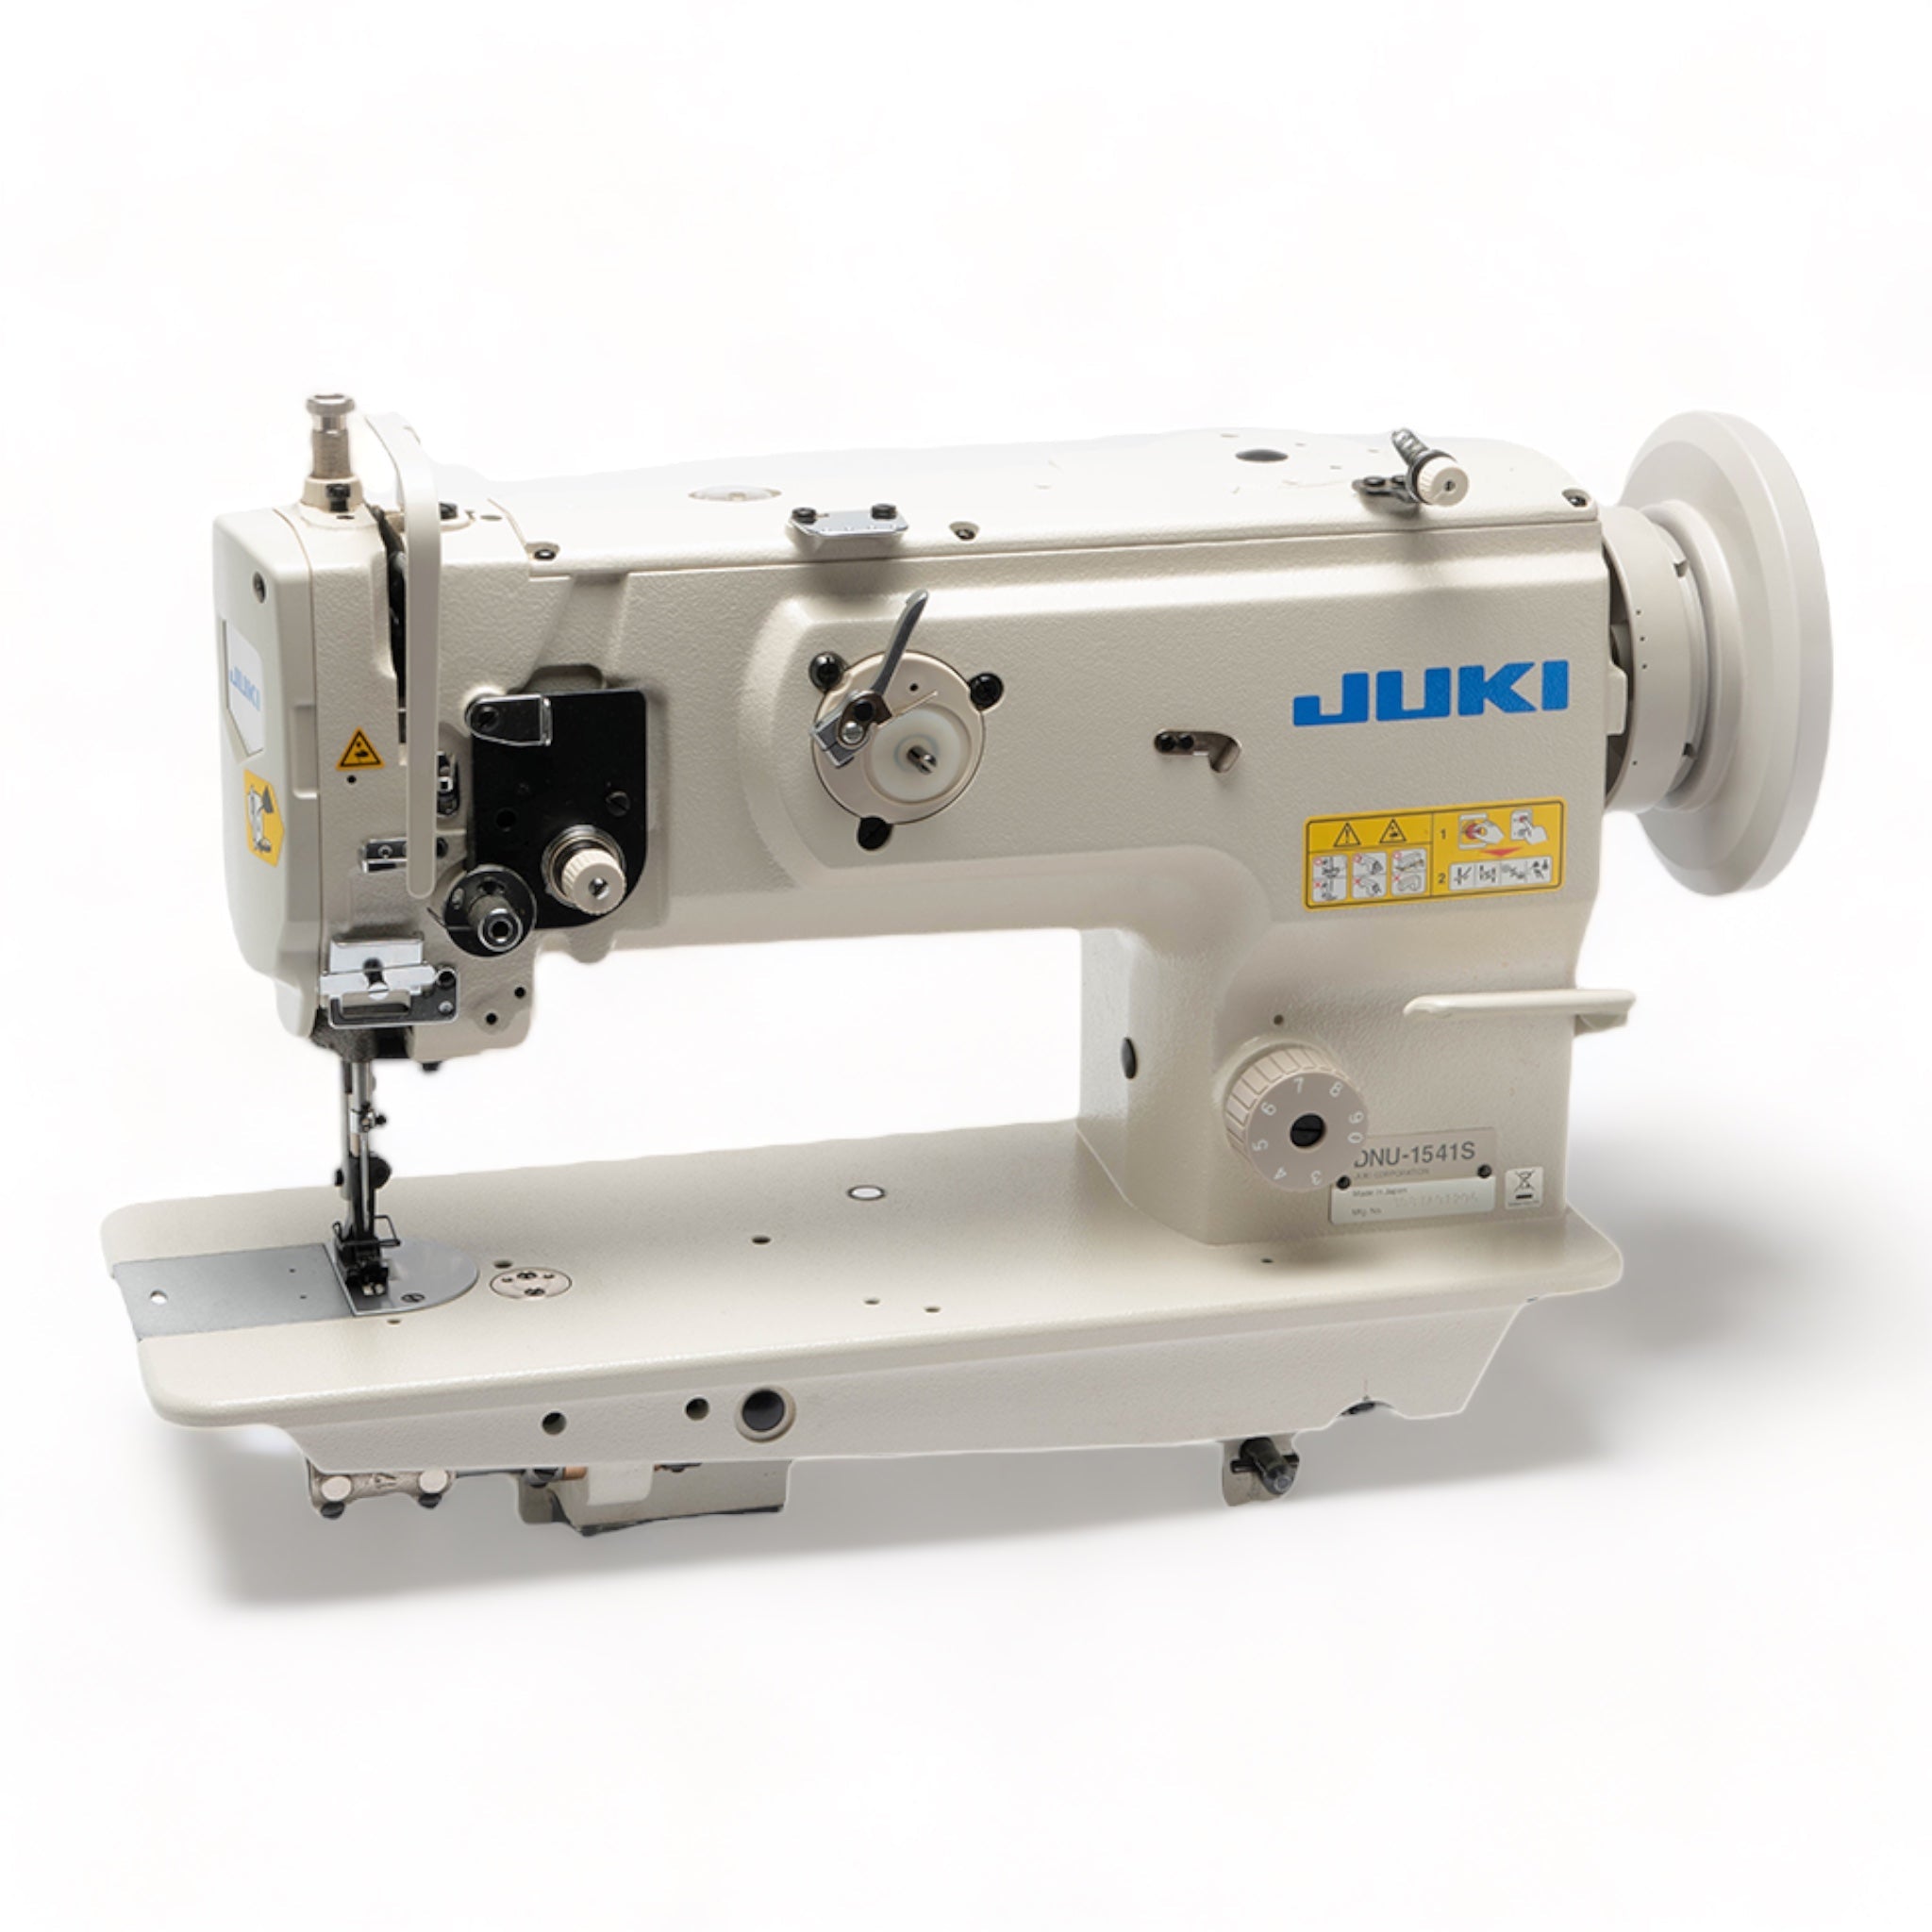 JUKI DNU-1541 Single Needle Heavy Duty Unison Feed Walking Foot Sewing Machine Assembled with Servo Motor, Table and Stand Included (Copy)